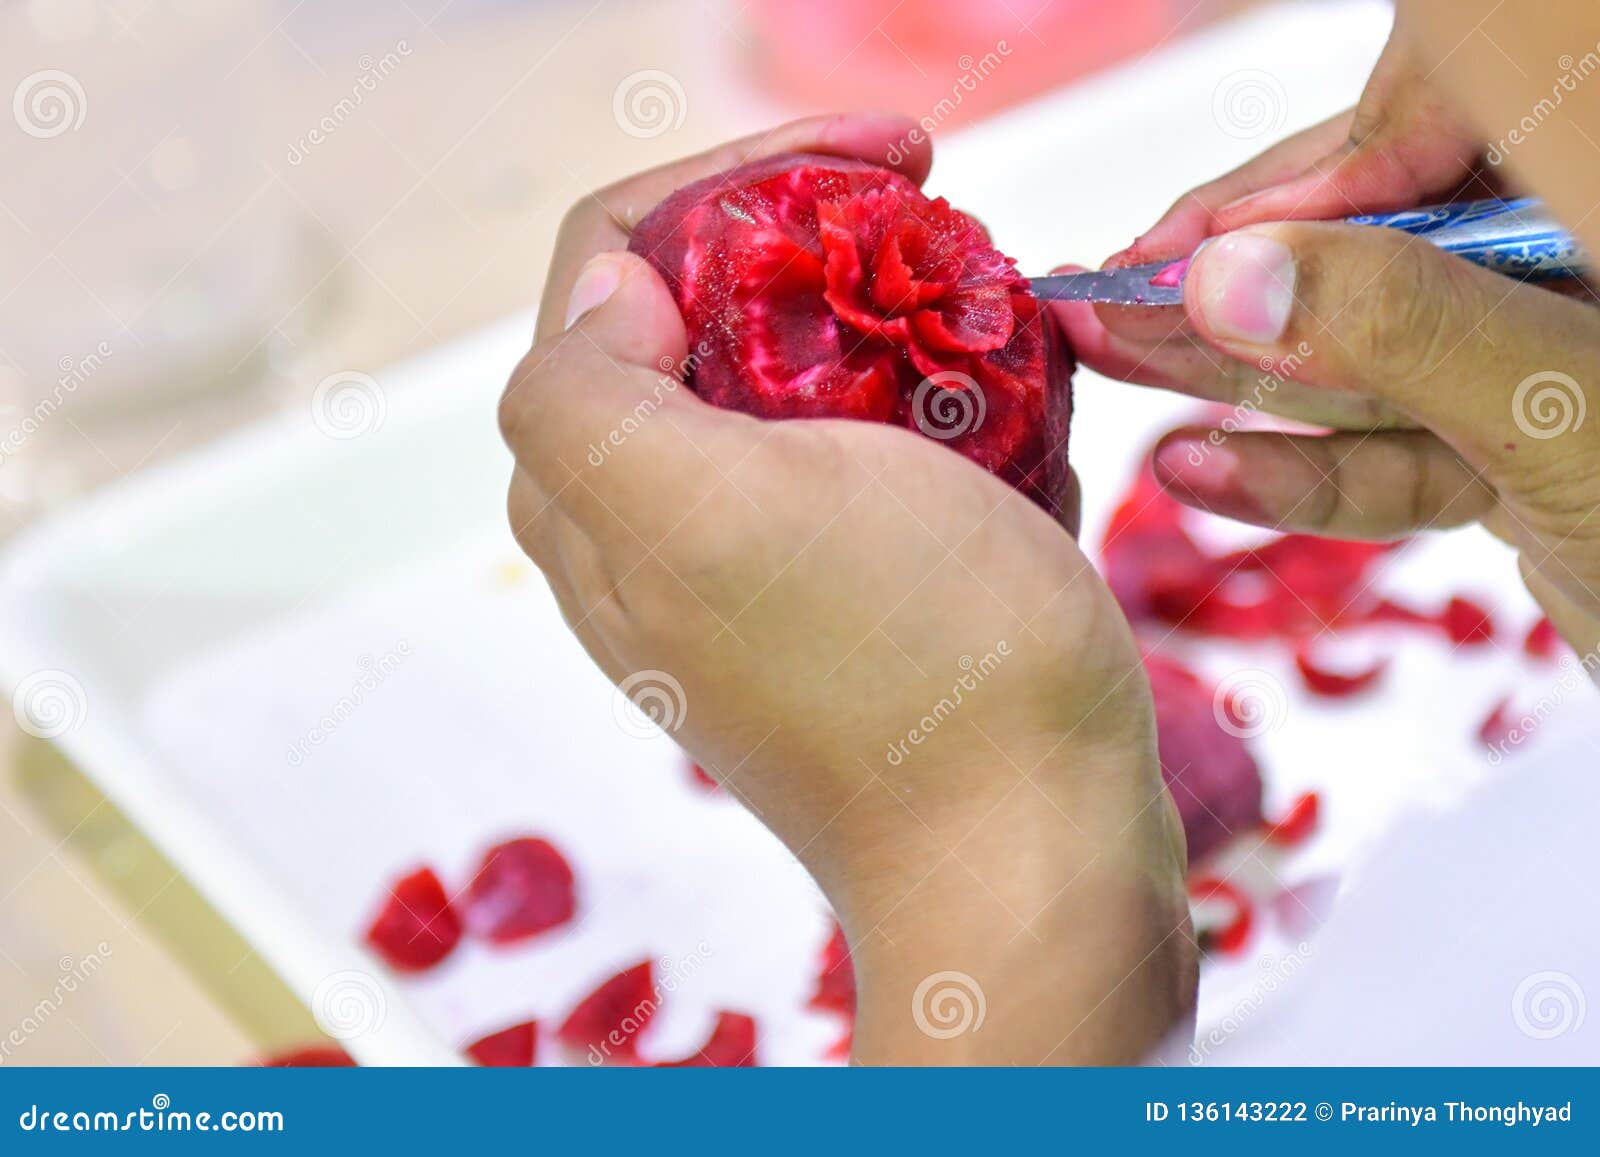 thai fruit carving with hand, vegetable and fruit carving